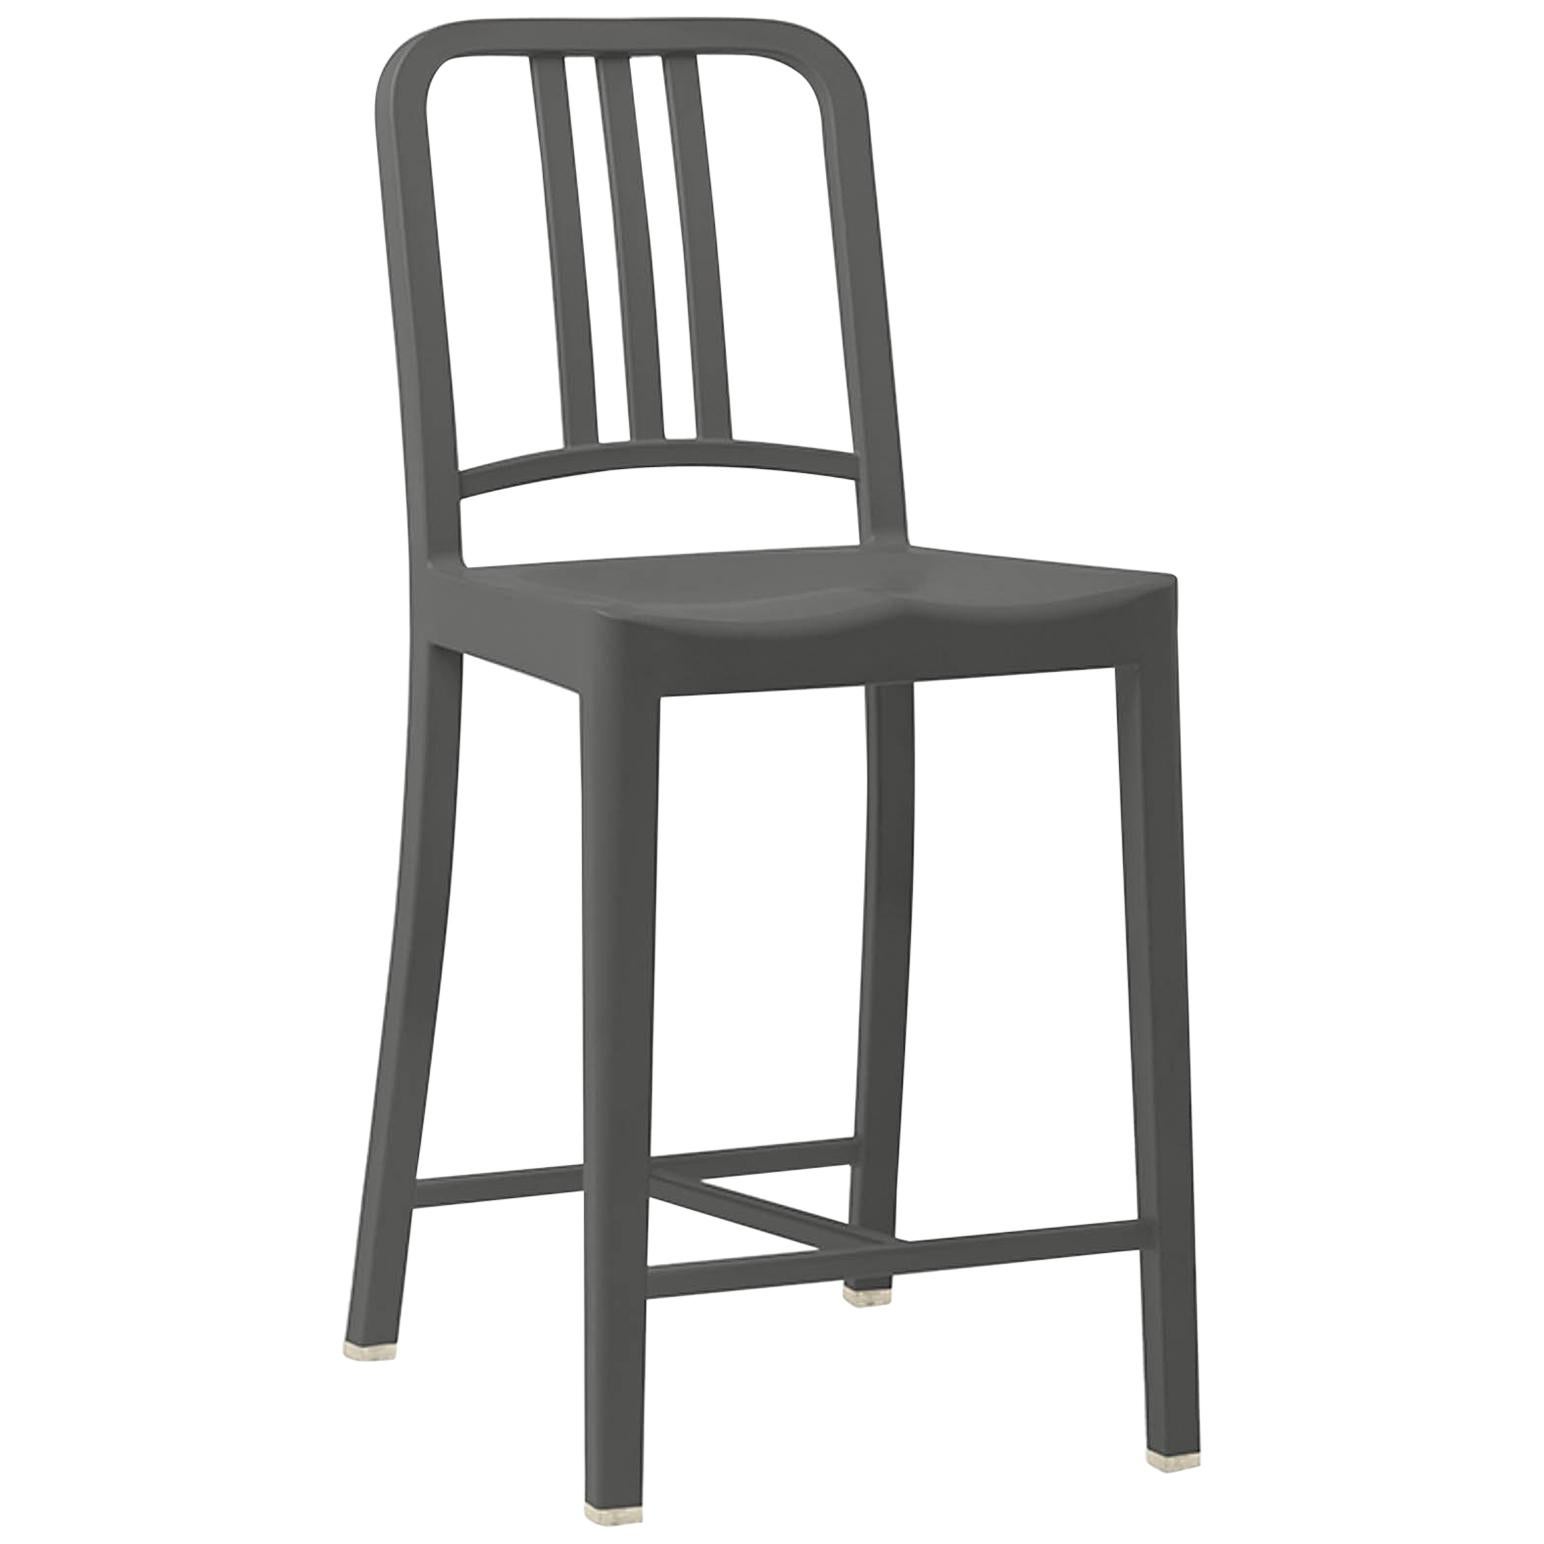 Emeco 111 Navy Counter Stool in Charcoal by Coca-Cola